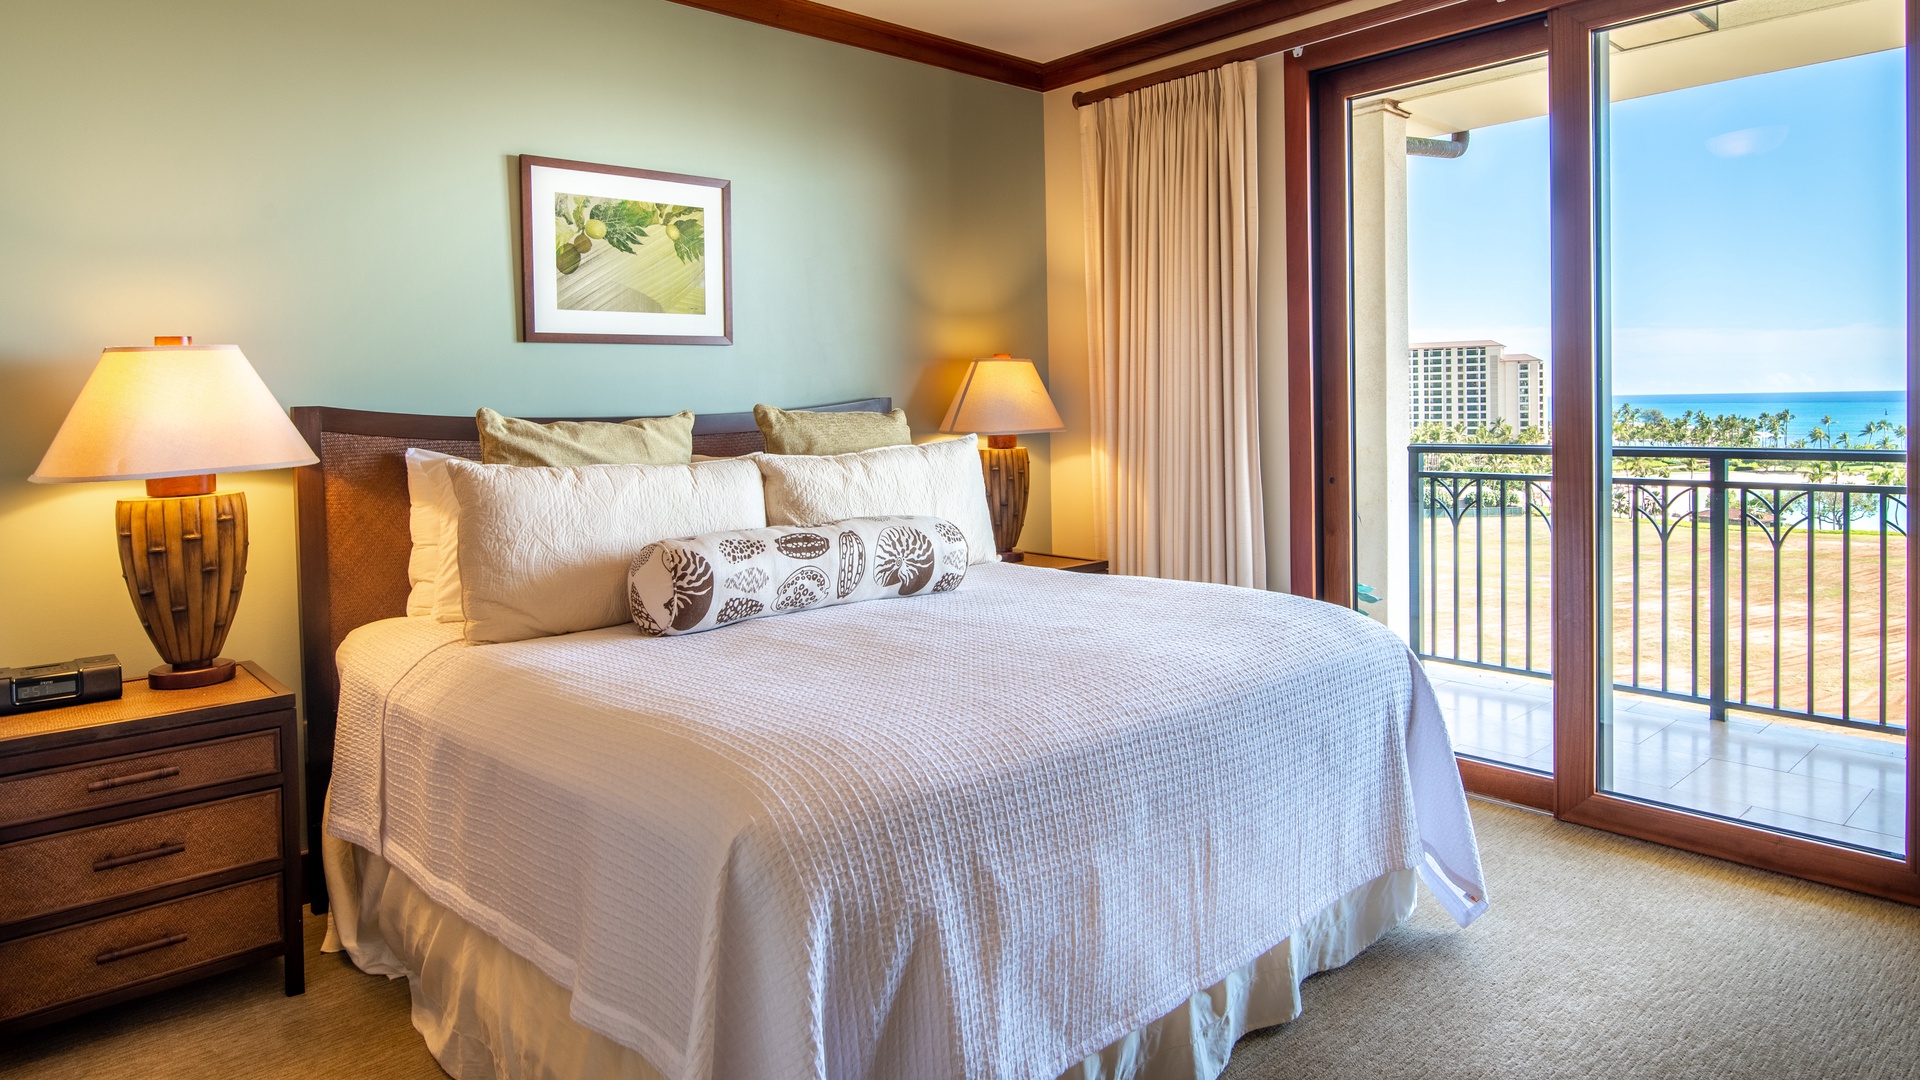 Kapolei Vacation Rentals, Ko Olina Beach Villas B901 - The primary guest room is tastefully decorated with peaceful views.